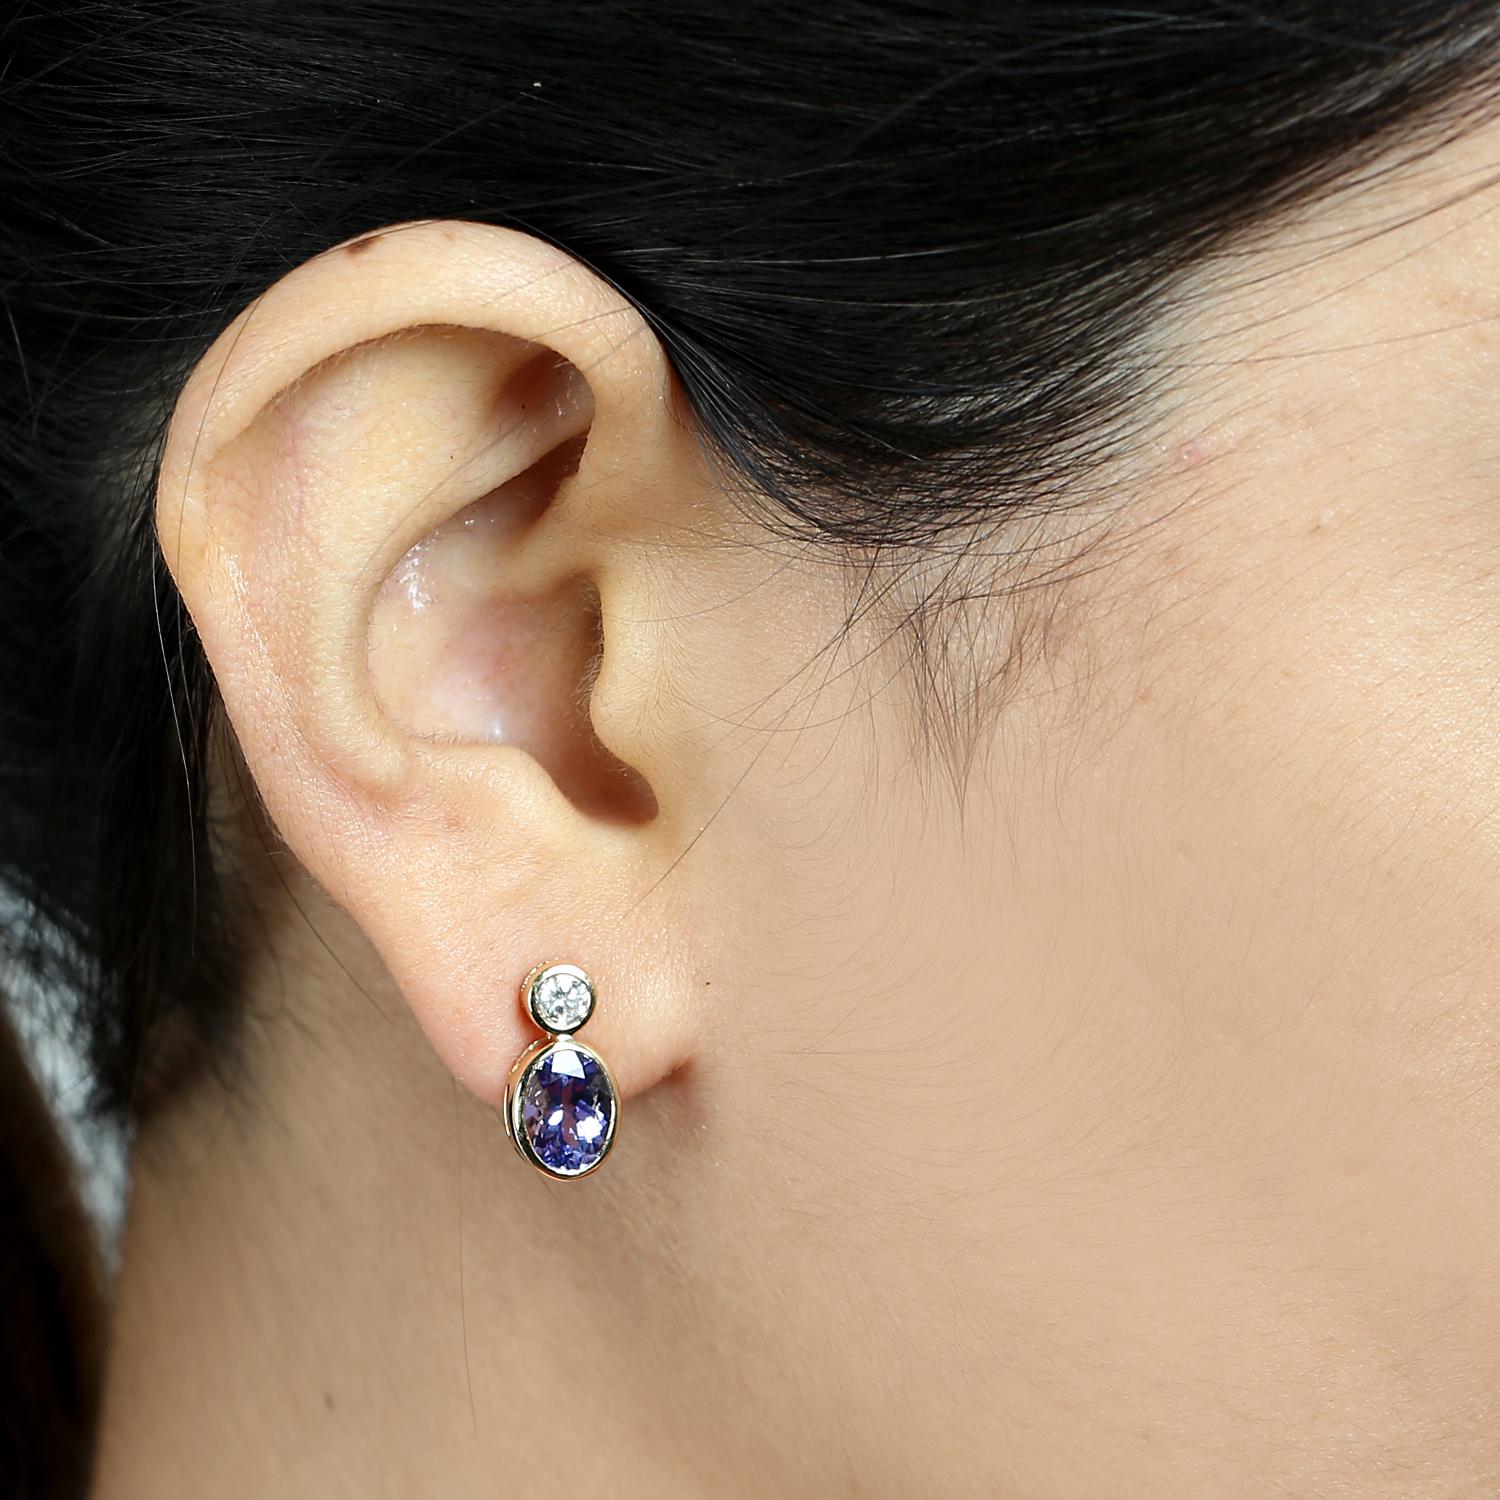 Mixed Cut Oval Shaped Blue Tanzanite Stud Earrings with Diamonds Made in 18k Gold For Sale